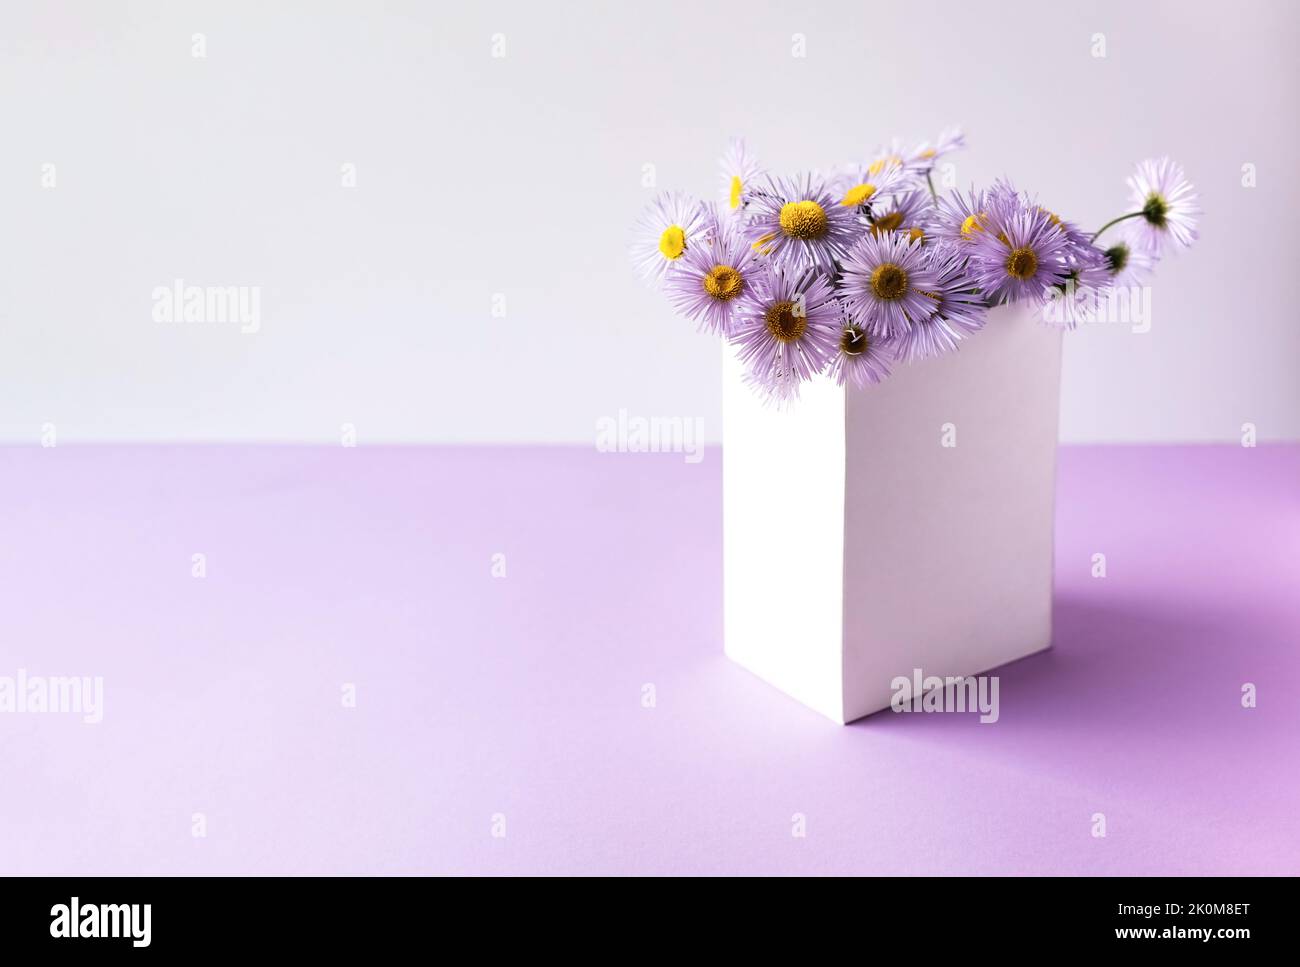 Purple erigeron flowers in a white box on a purple background, summer flowers Stock Photo